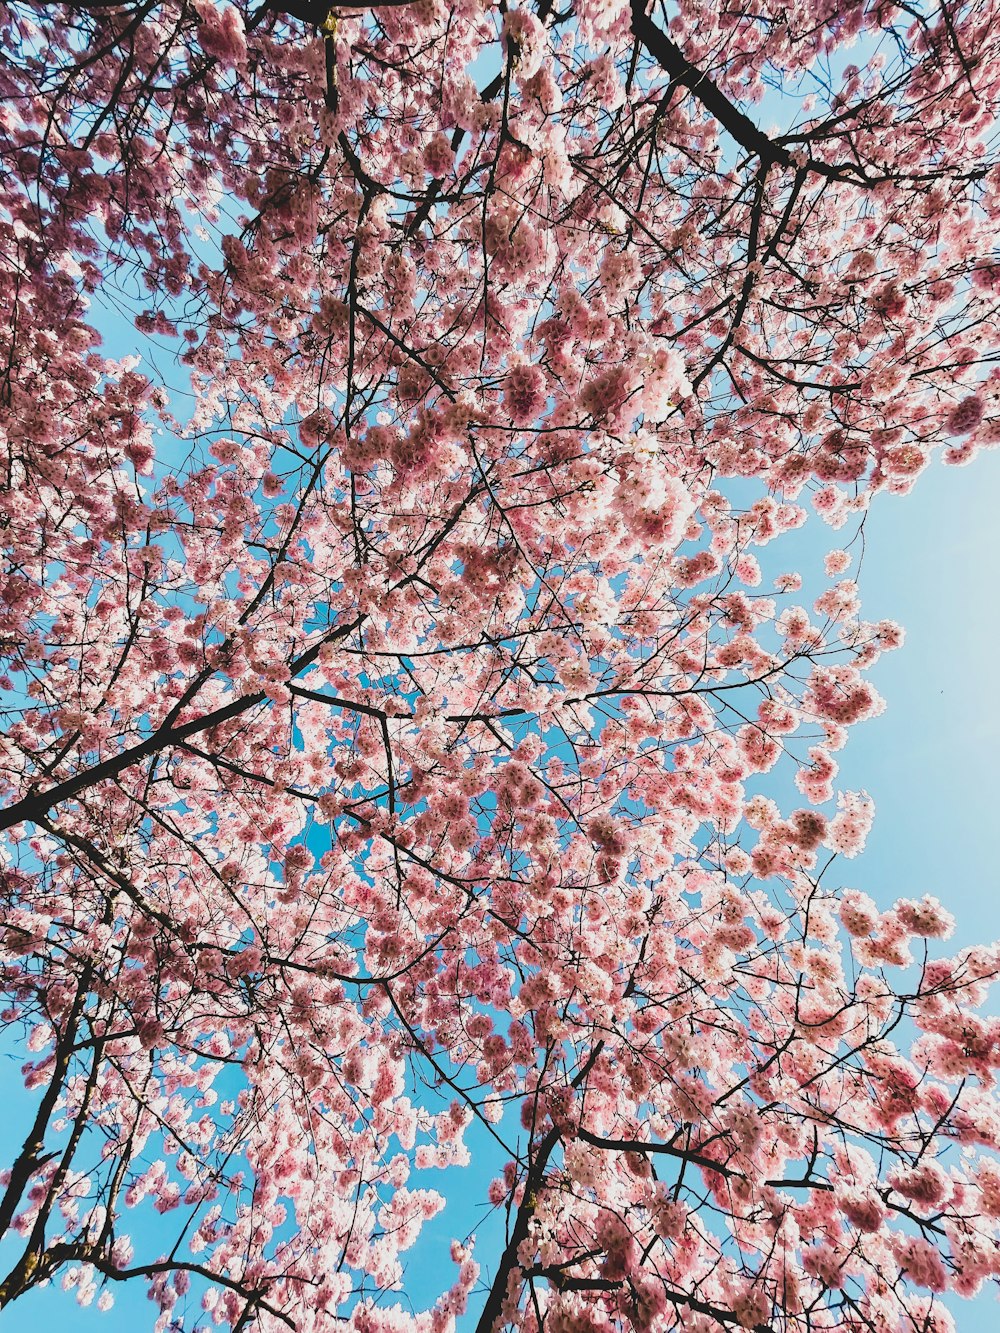 a tree with lots of pink flowers on it